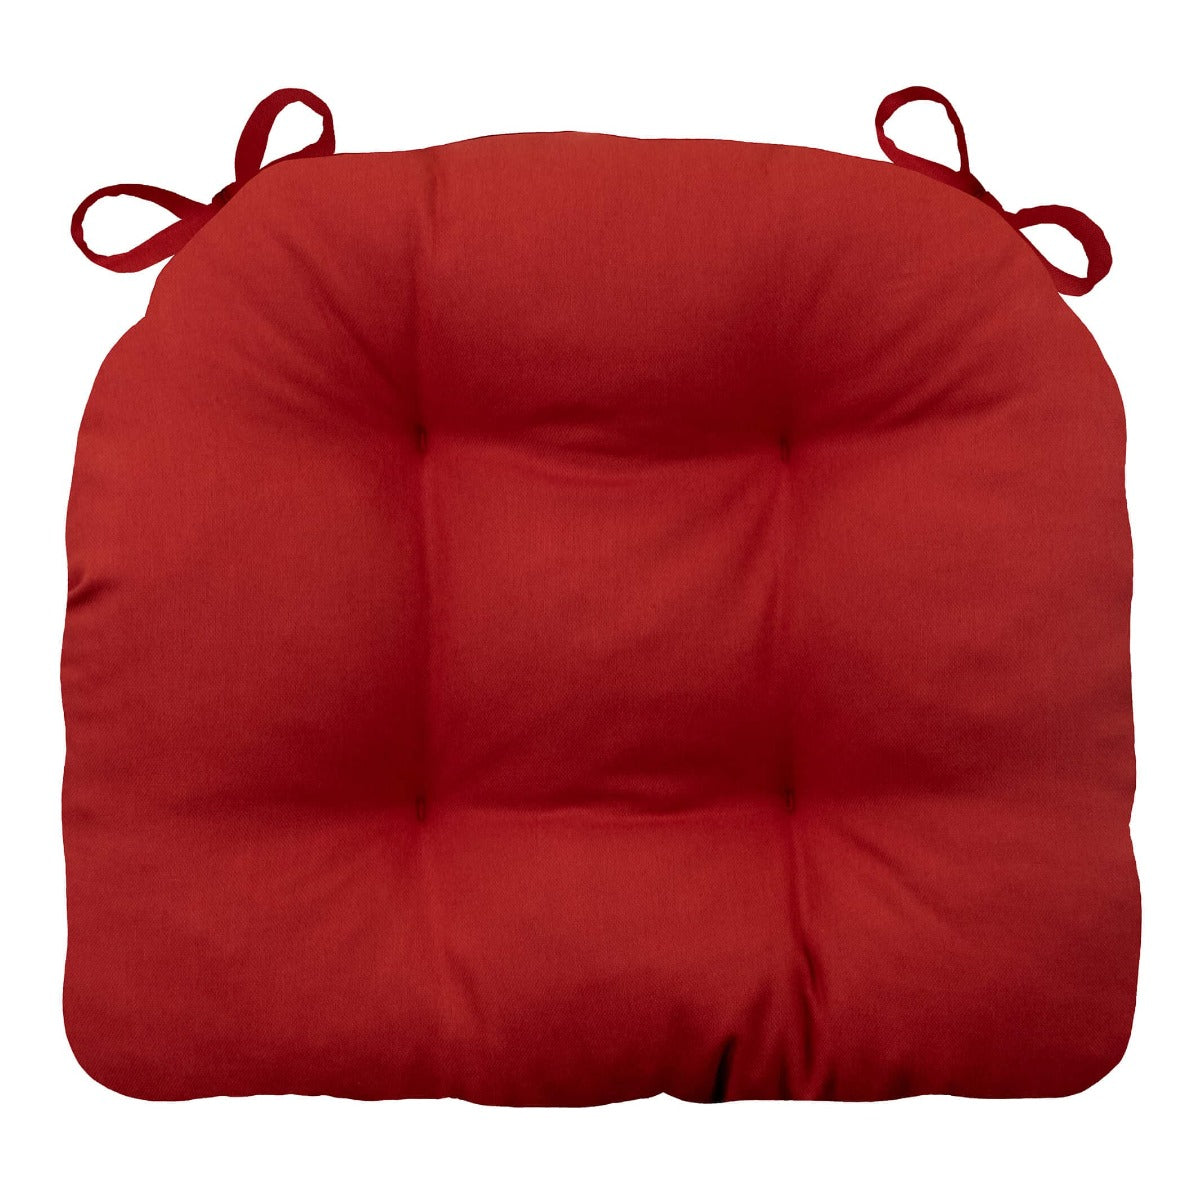 Barnett Home Decor | Cotton Duck Red Extra Thick Chair pad